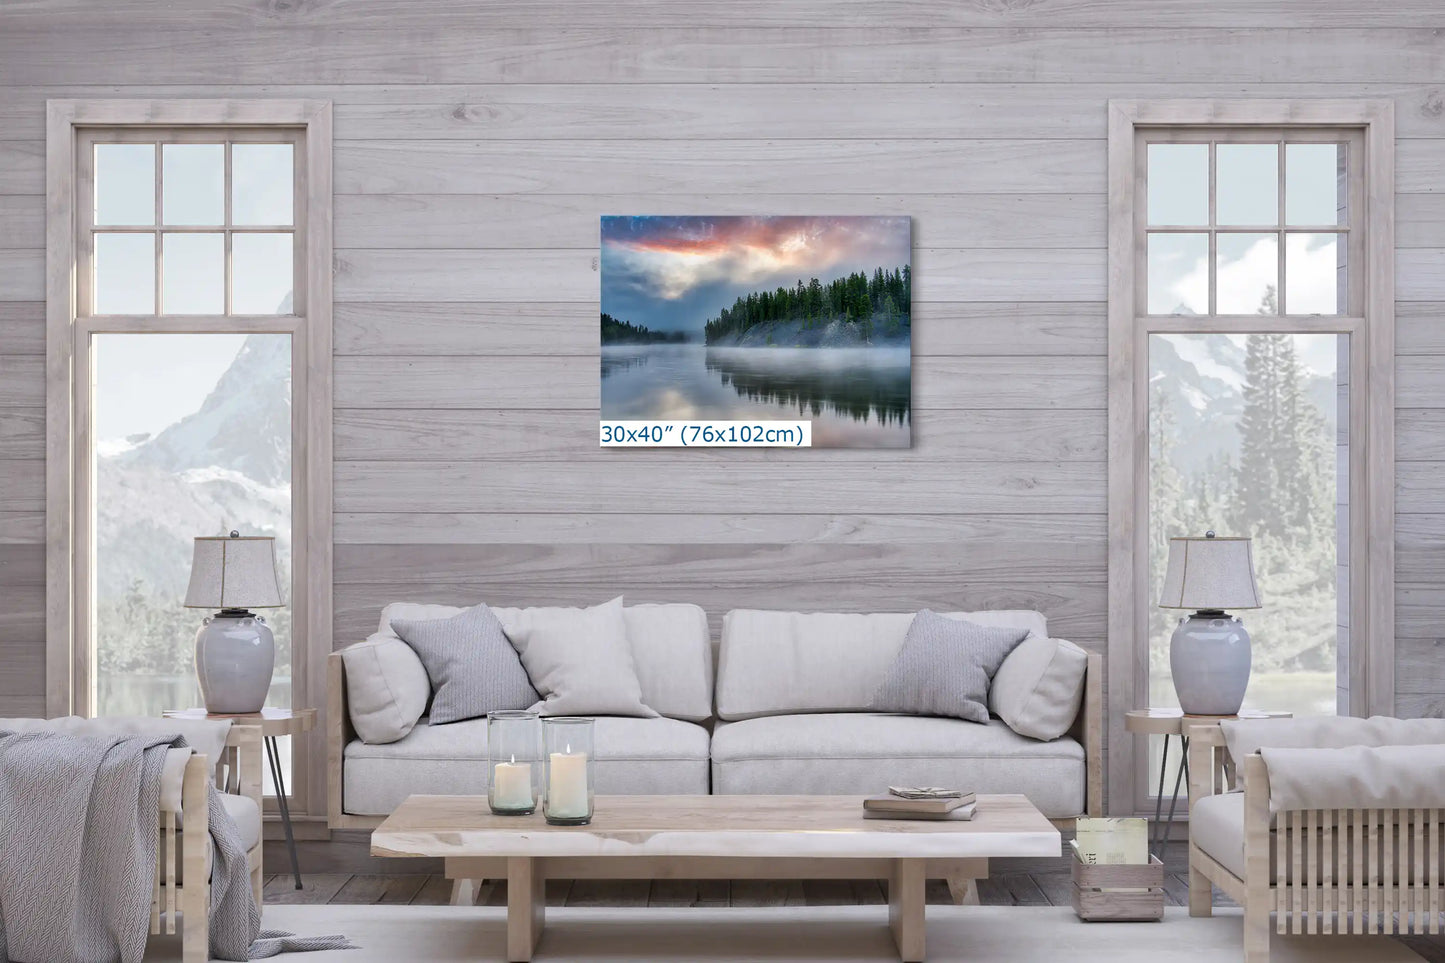 Yellowstone Lake's dawn reflection captured in a grand 30x40 canvas, accentuating a spacious living room.